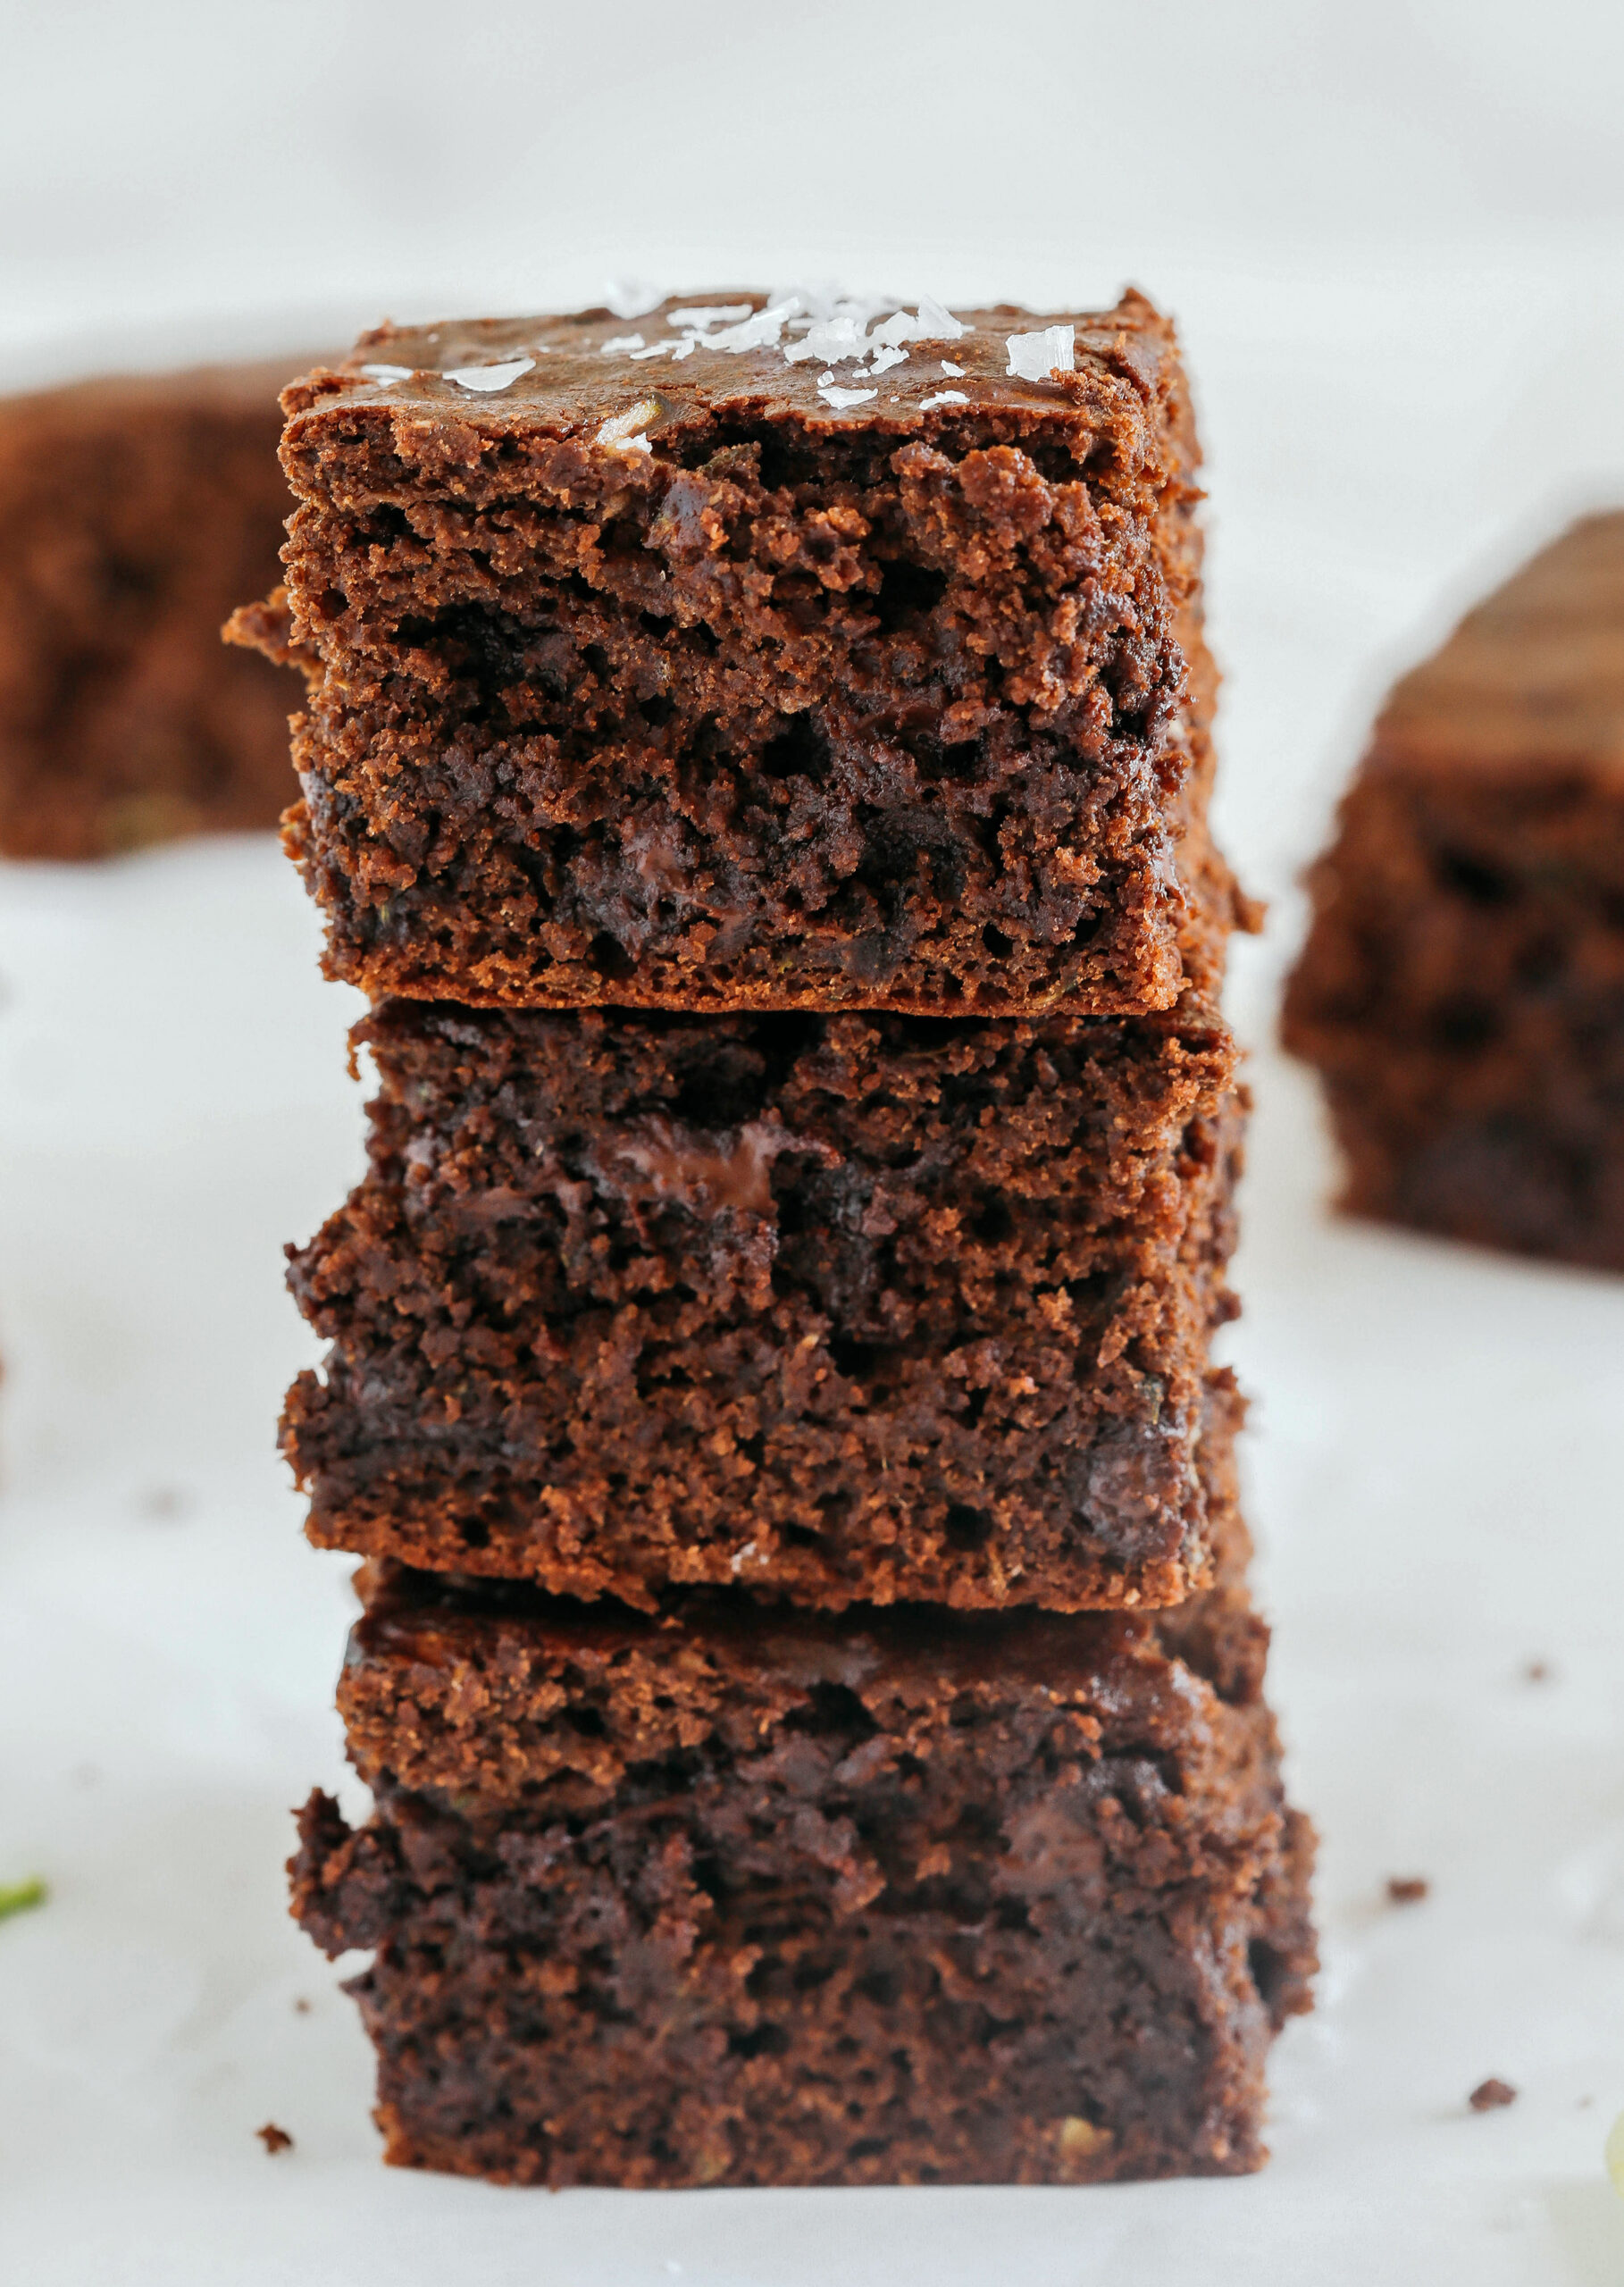 These Fudgy Zucchini Brownies are deliciously moist with a rich chocolate taste loaded with shredded zucchini and made healthier with zero butter or refined sugar!  One of our family's favorite summer desserts!